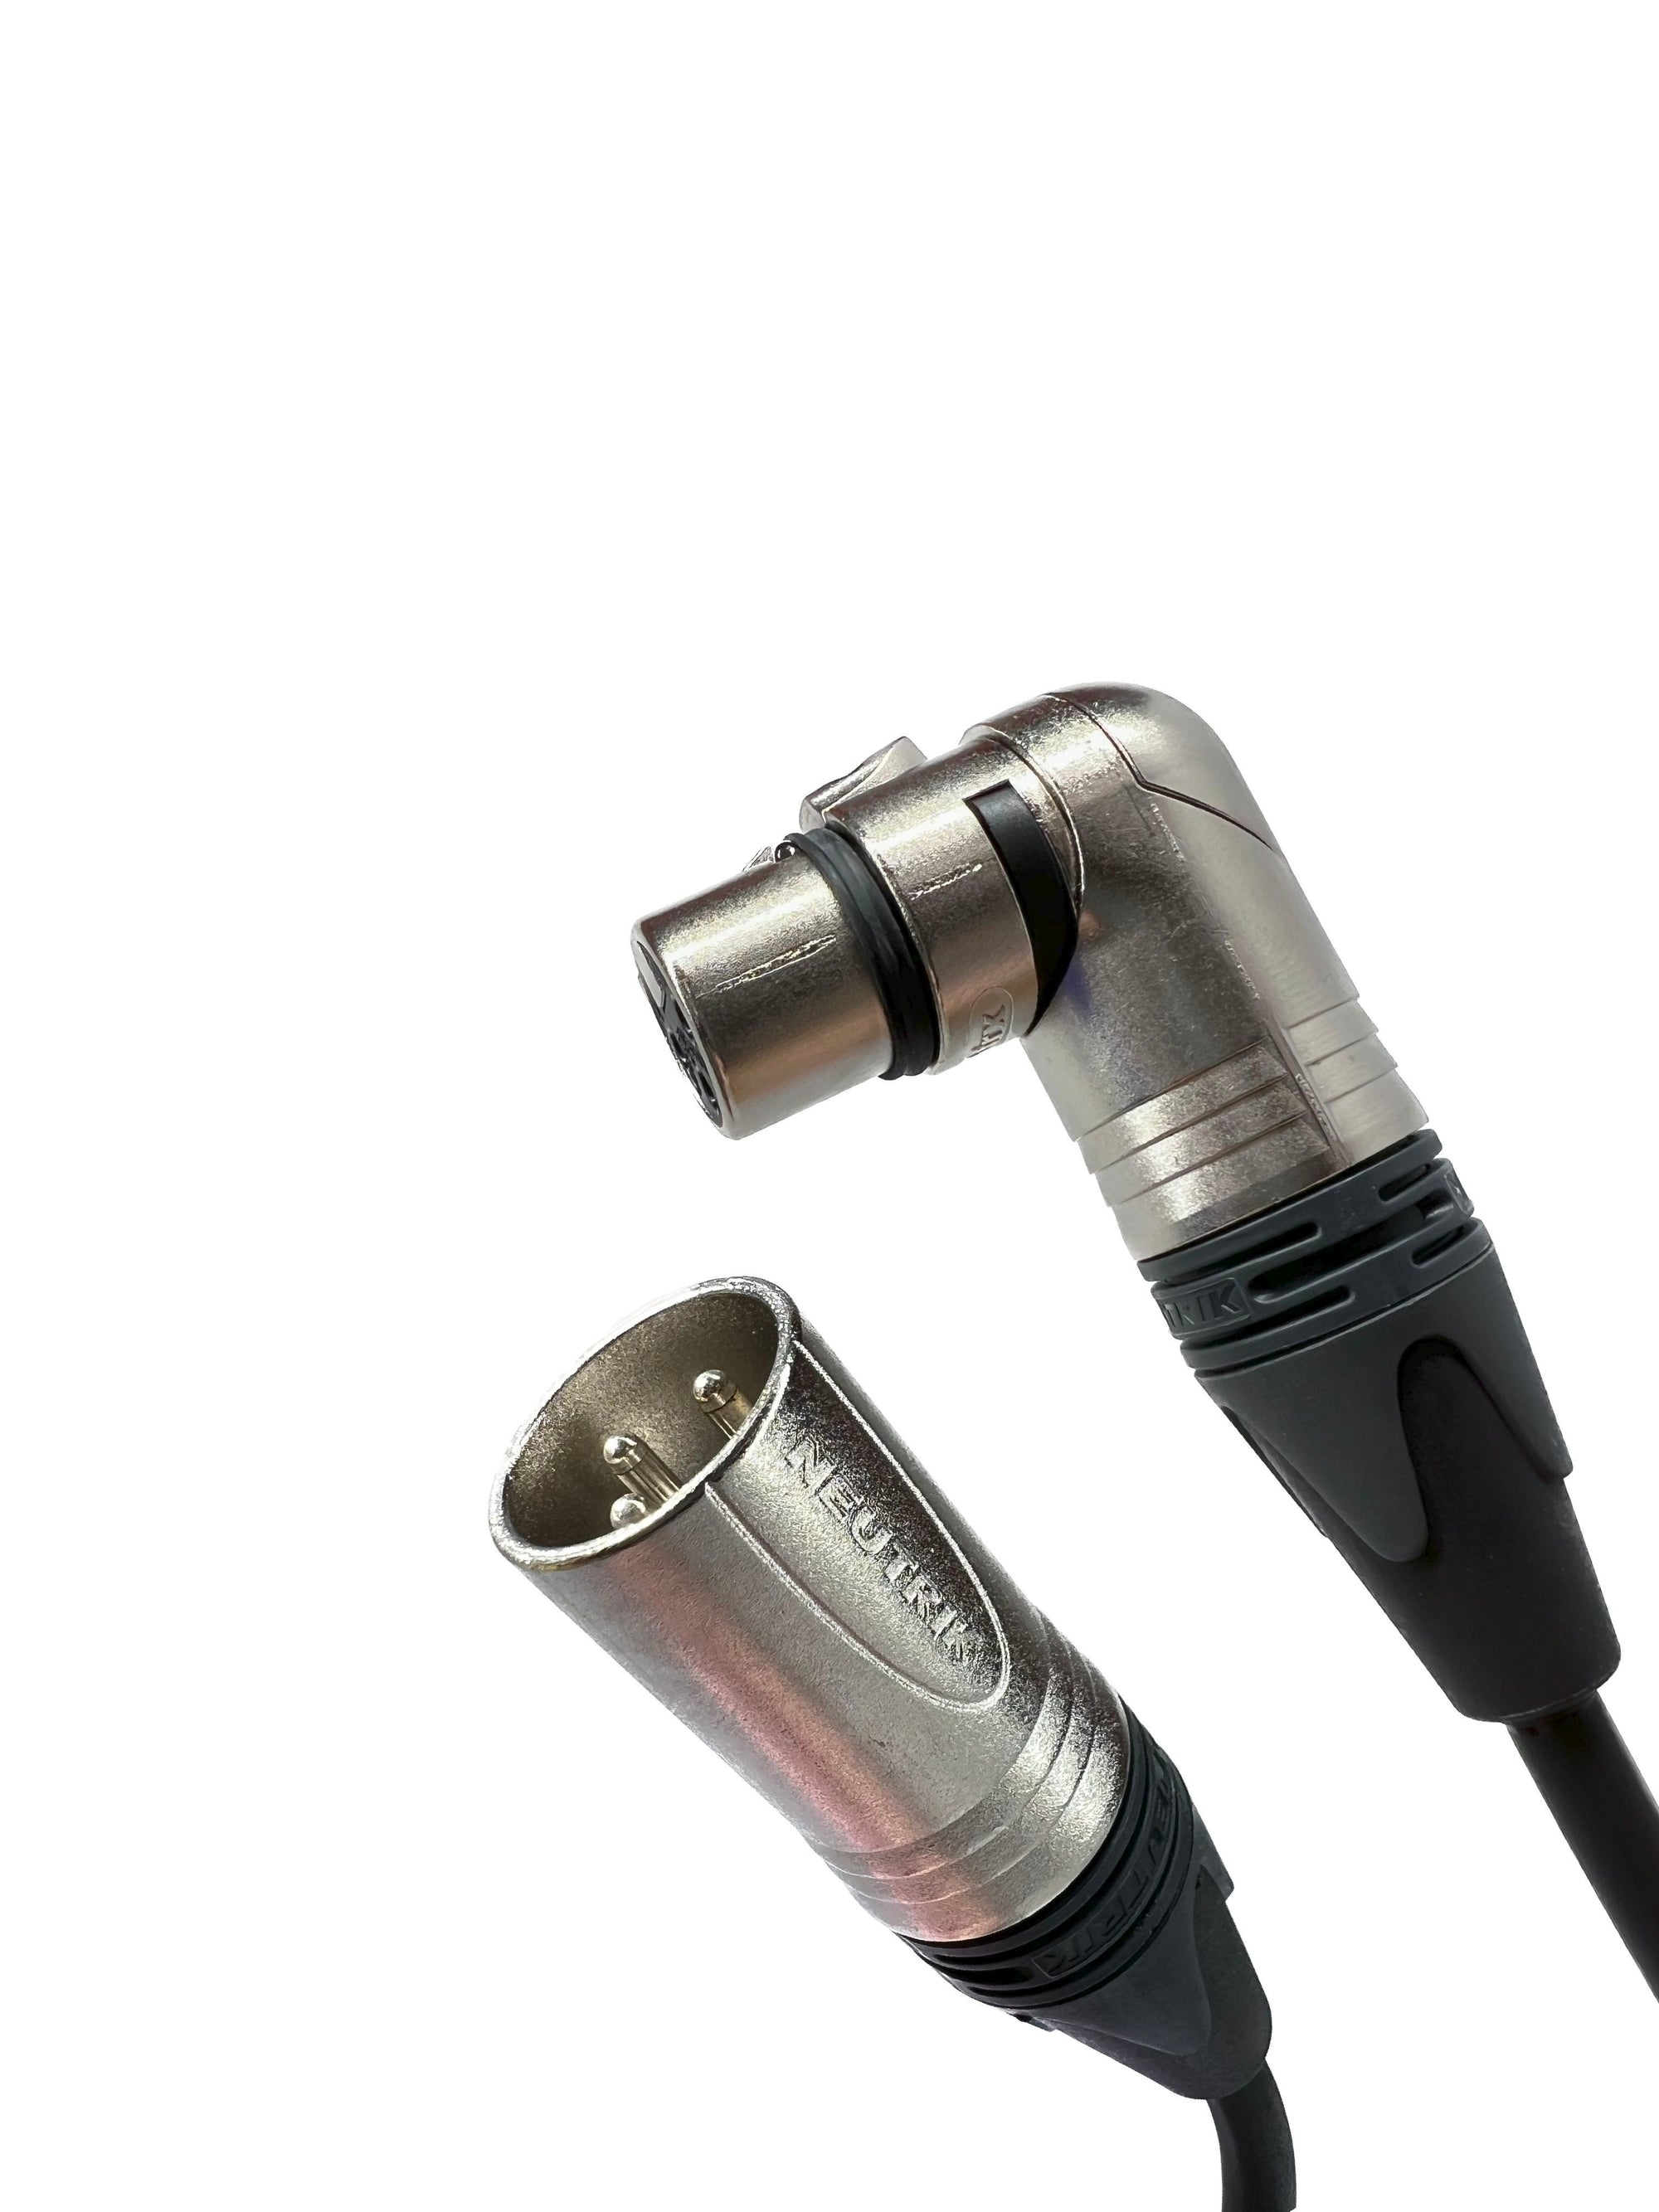 Pro Audio Tagged XLR - Custom Cable Connection